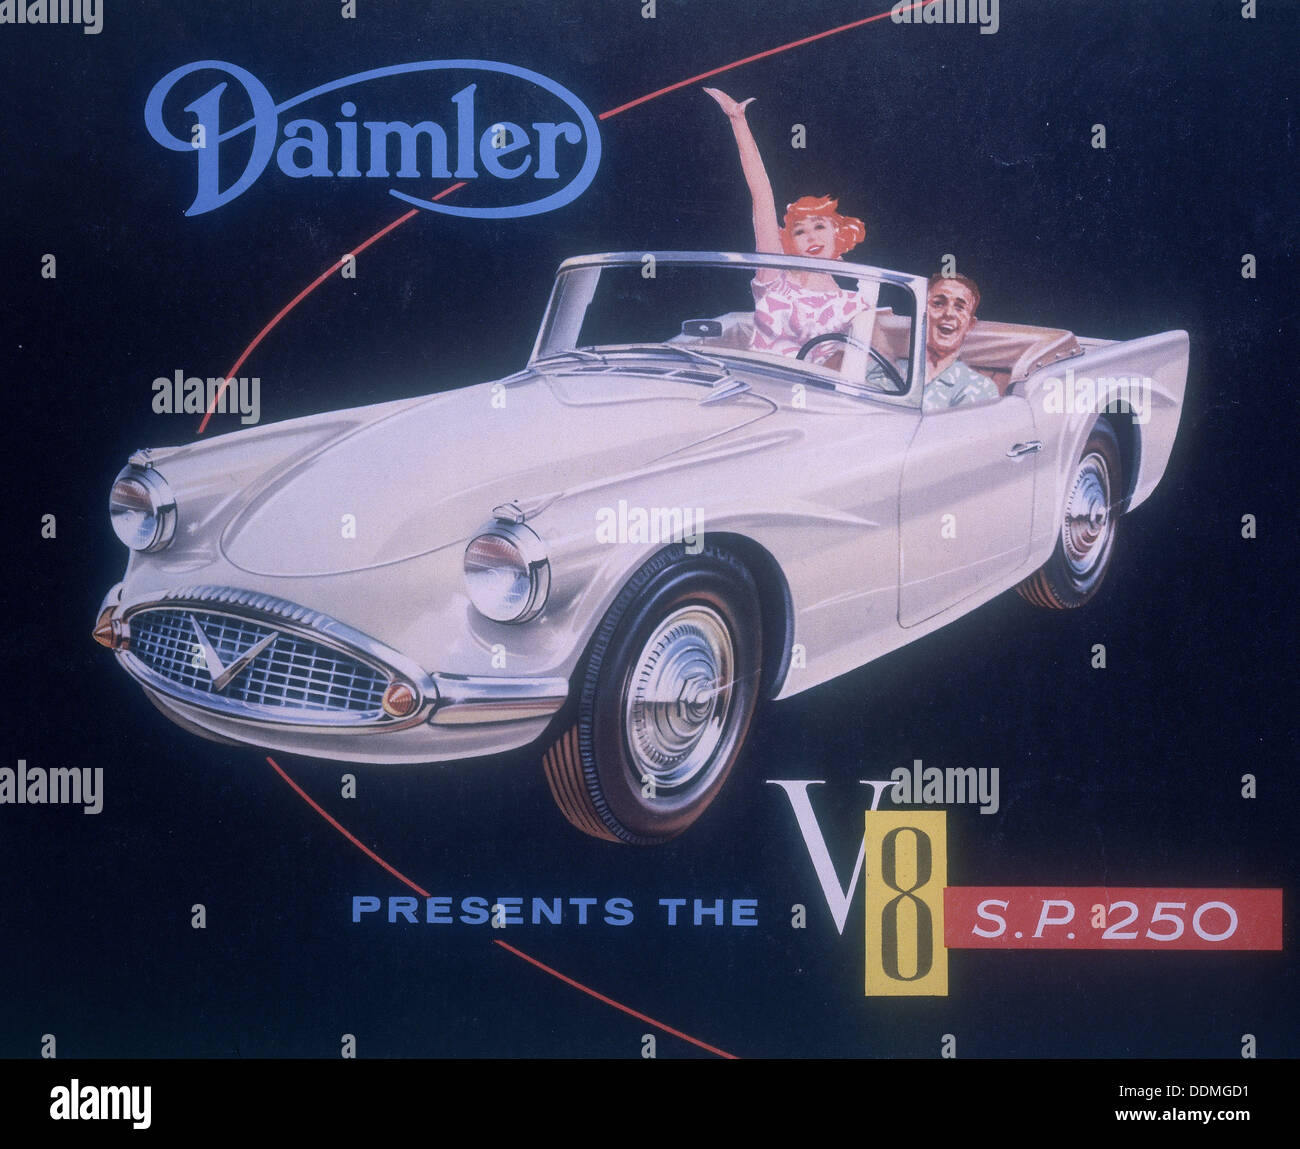 Poster advertising the Daimler V8 SP 250, 1959. Artist: Unknown Stock Photo